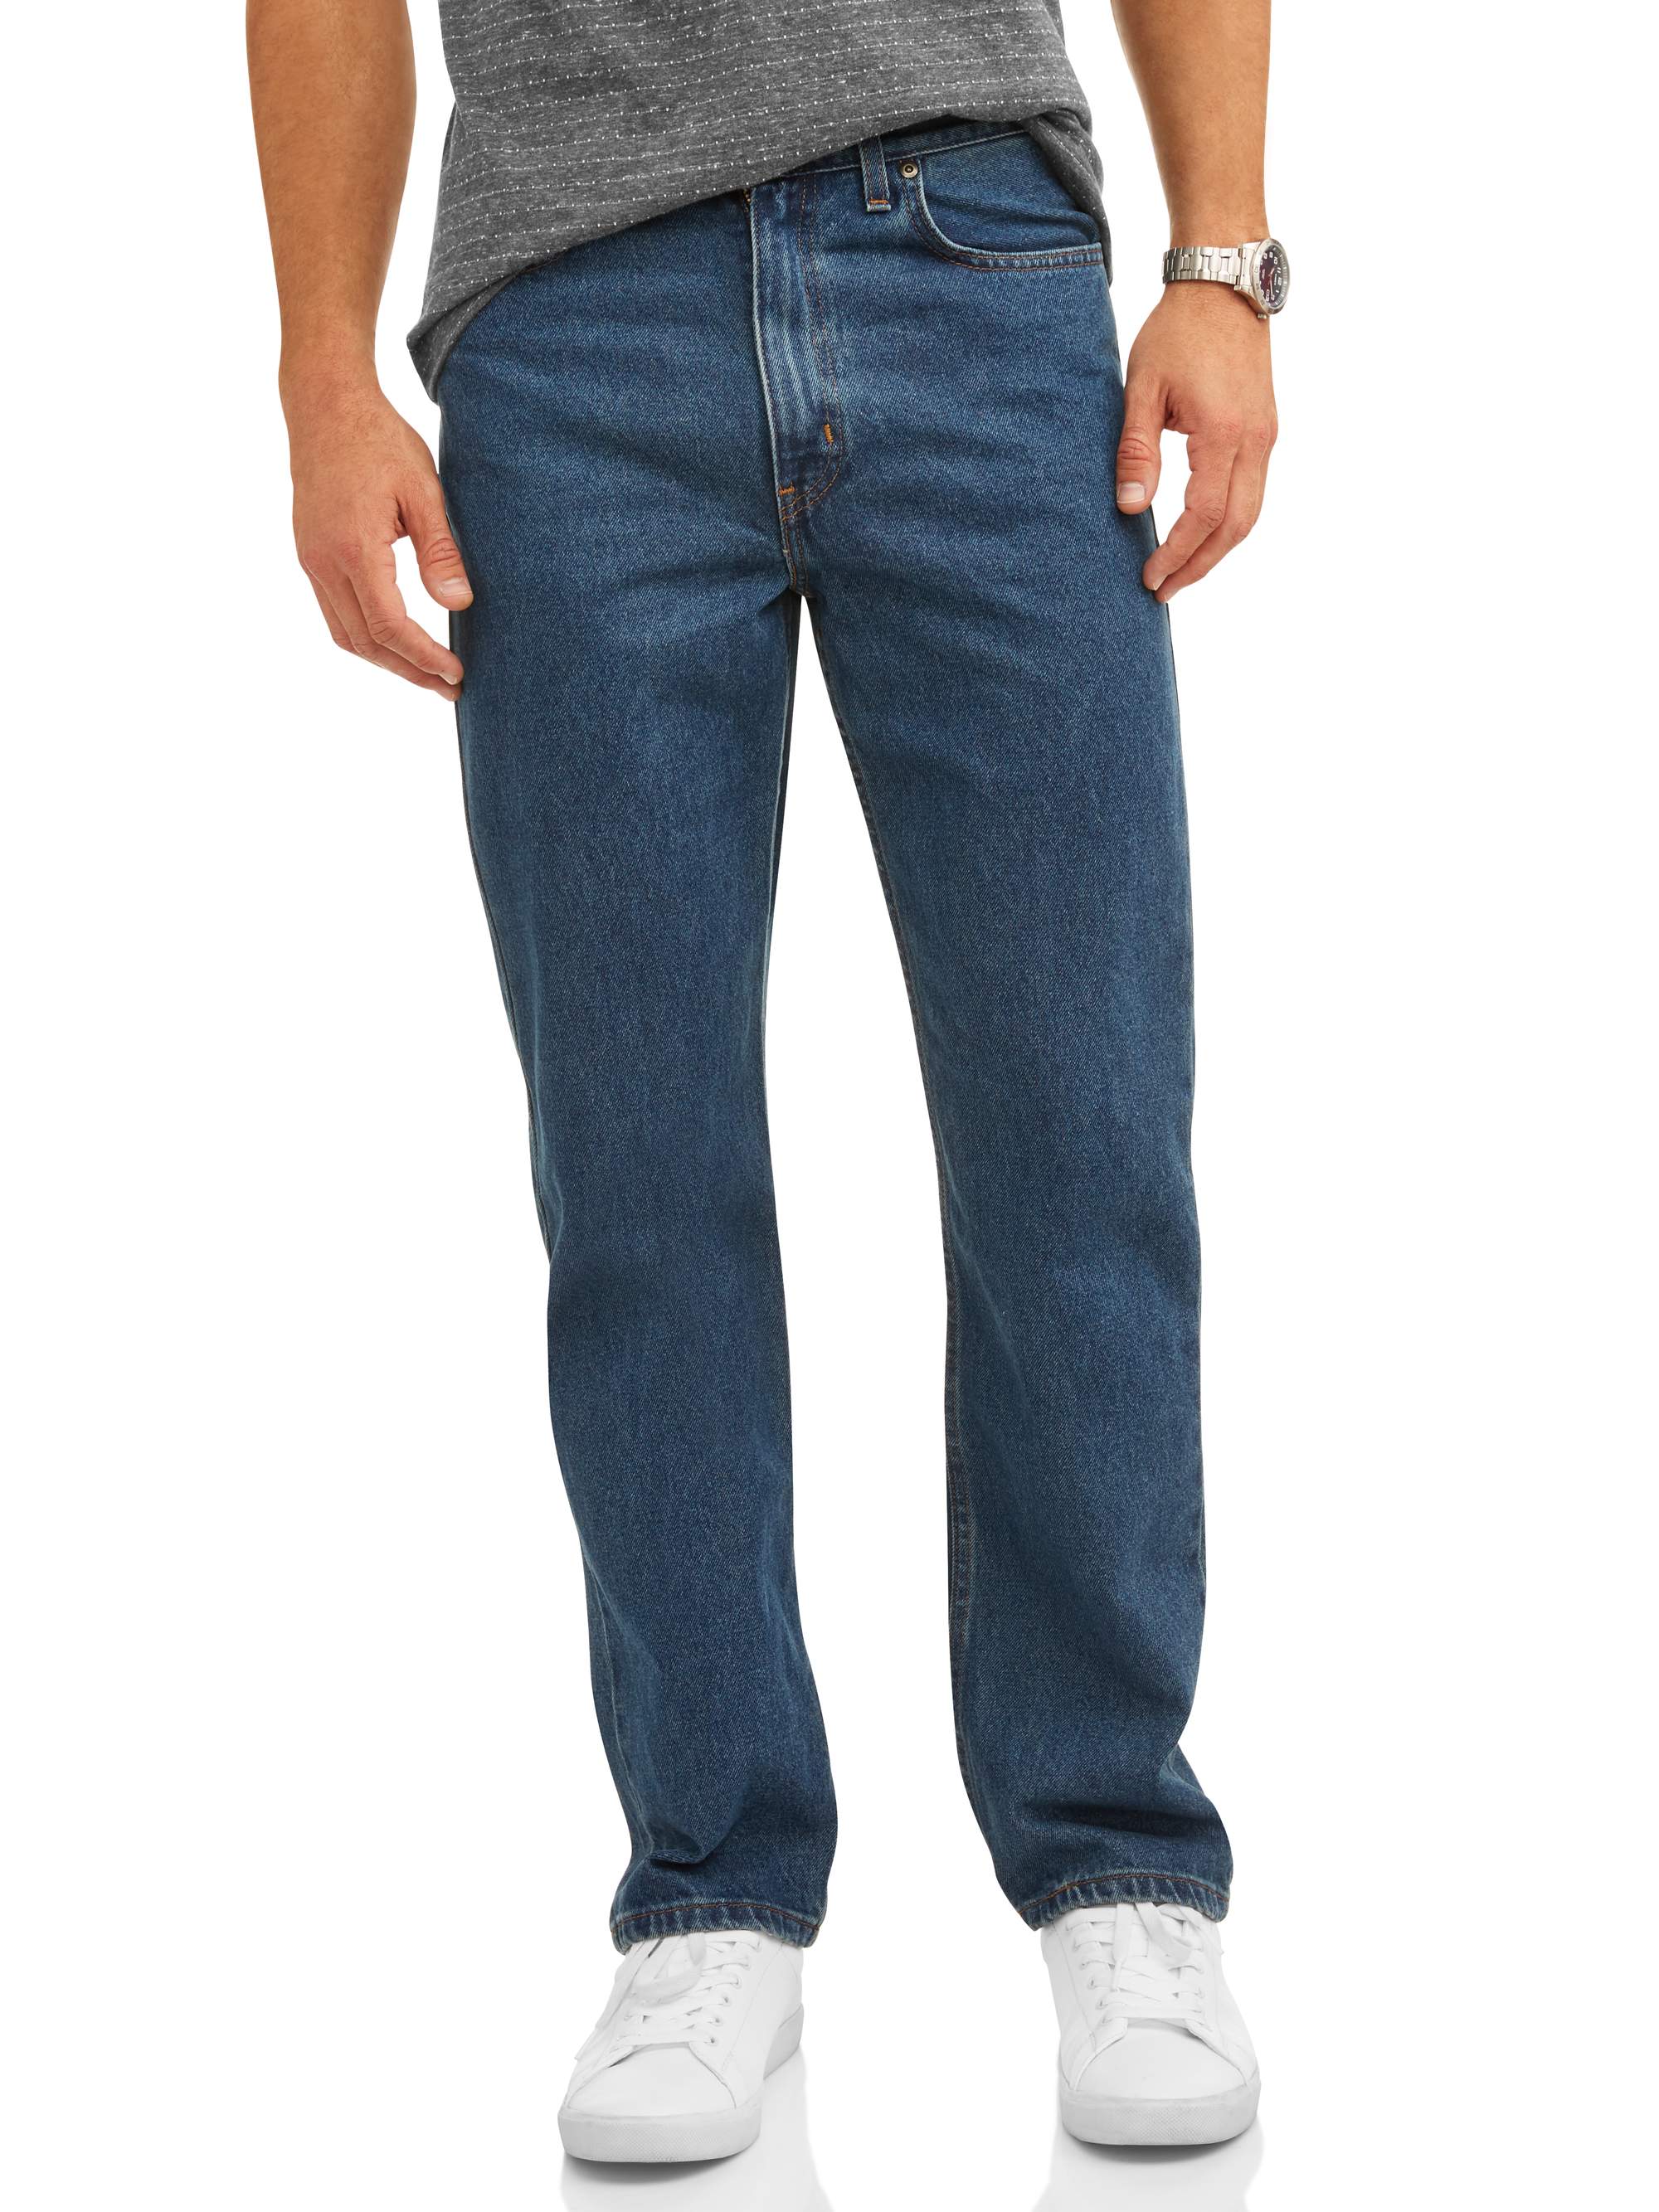 George Men's and Big Men's 100% Cotton Relaxed Fit Jeans - image 1 of 6